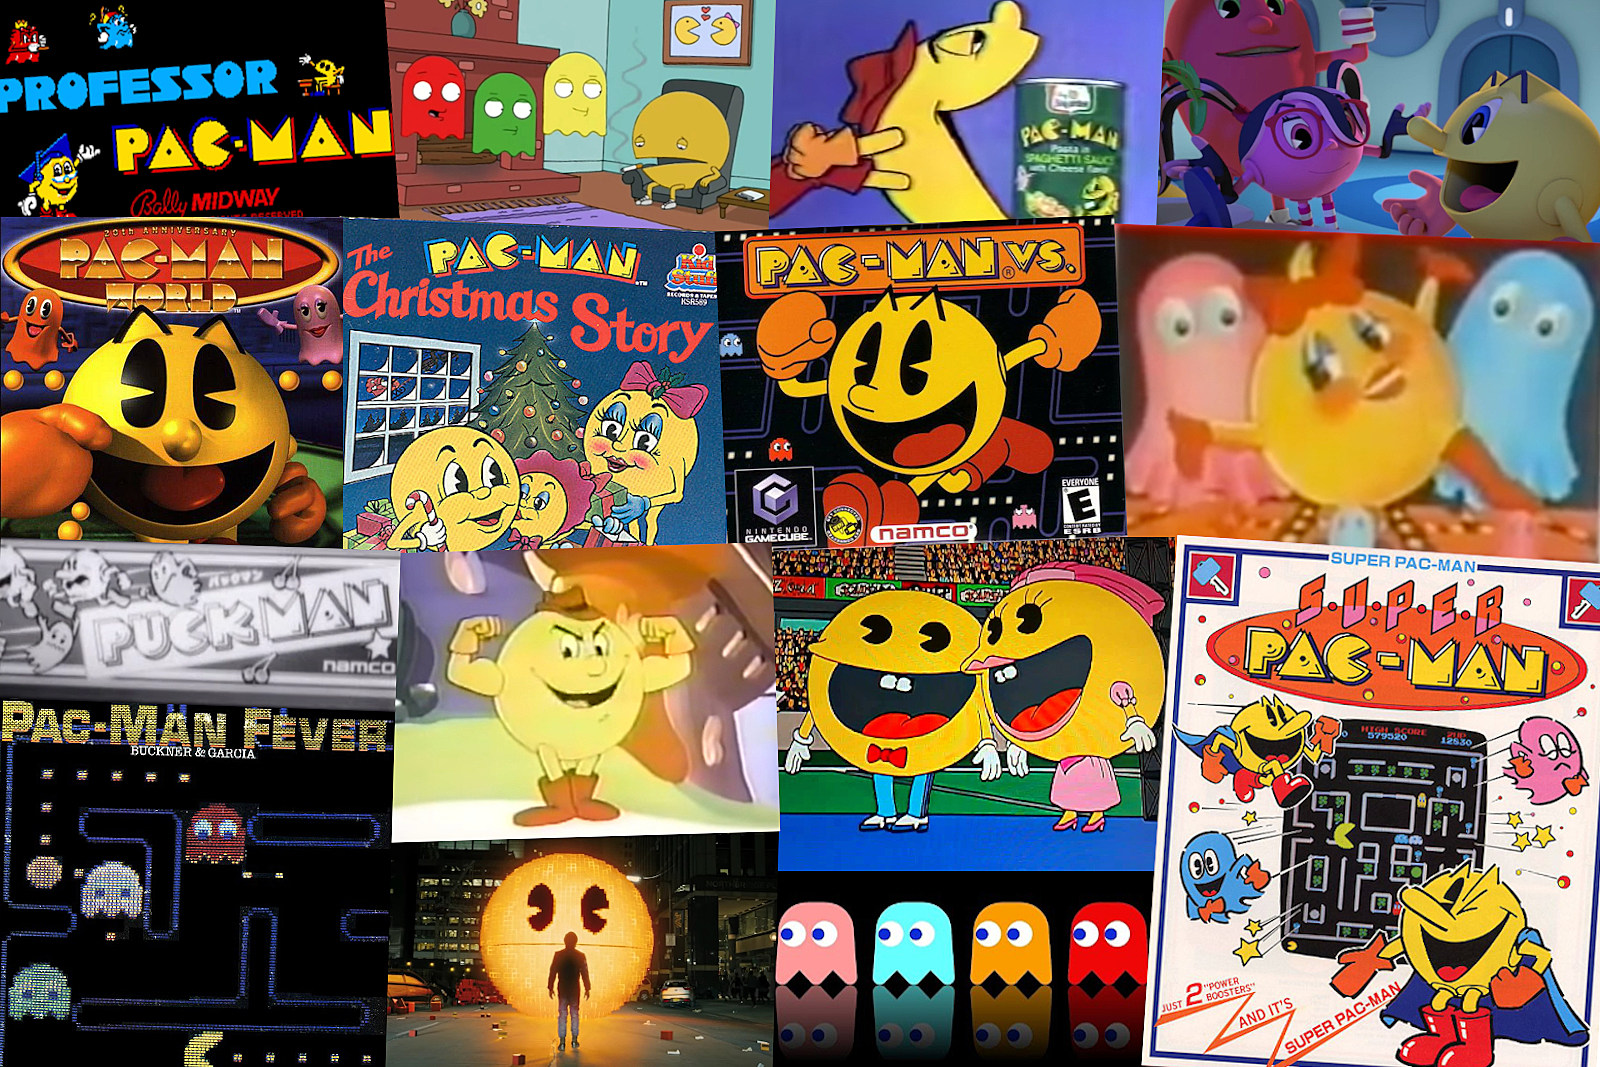 A collage displaying various iterations and representations of PAC-MAN across different media and styles.